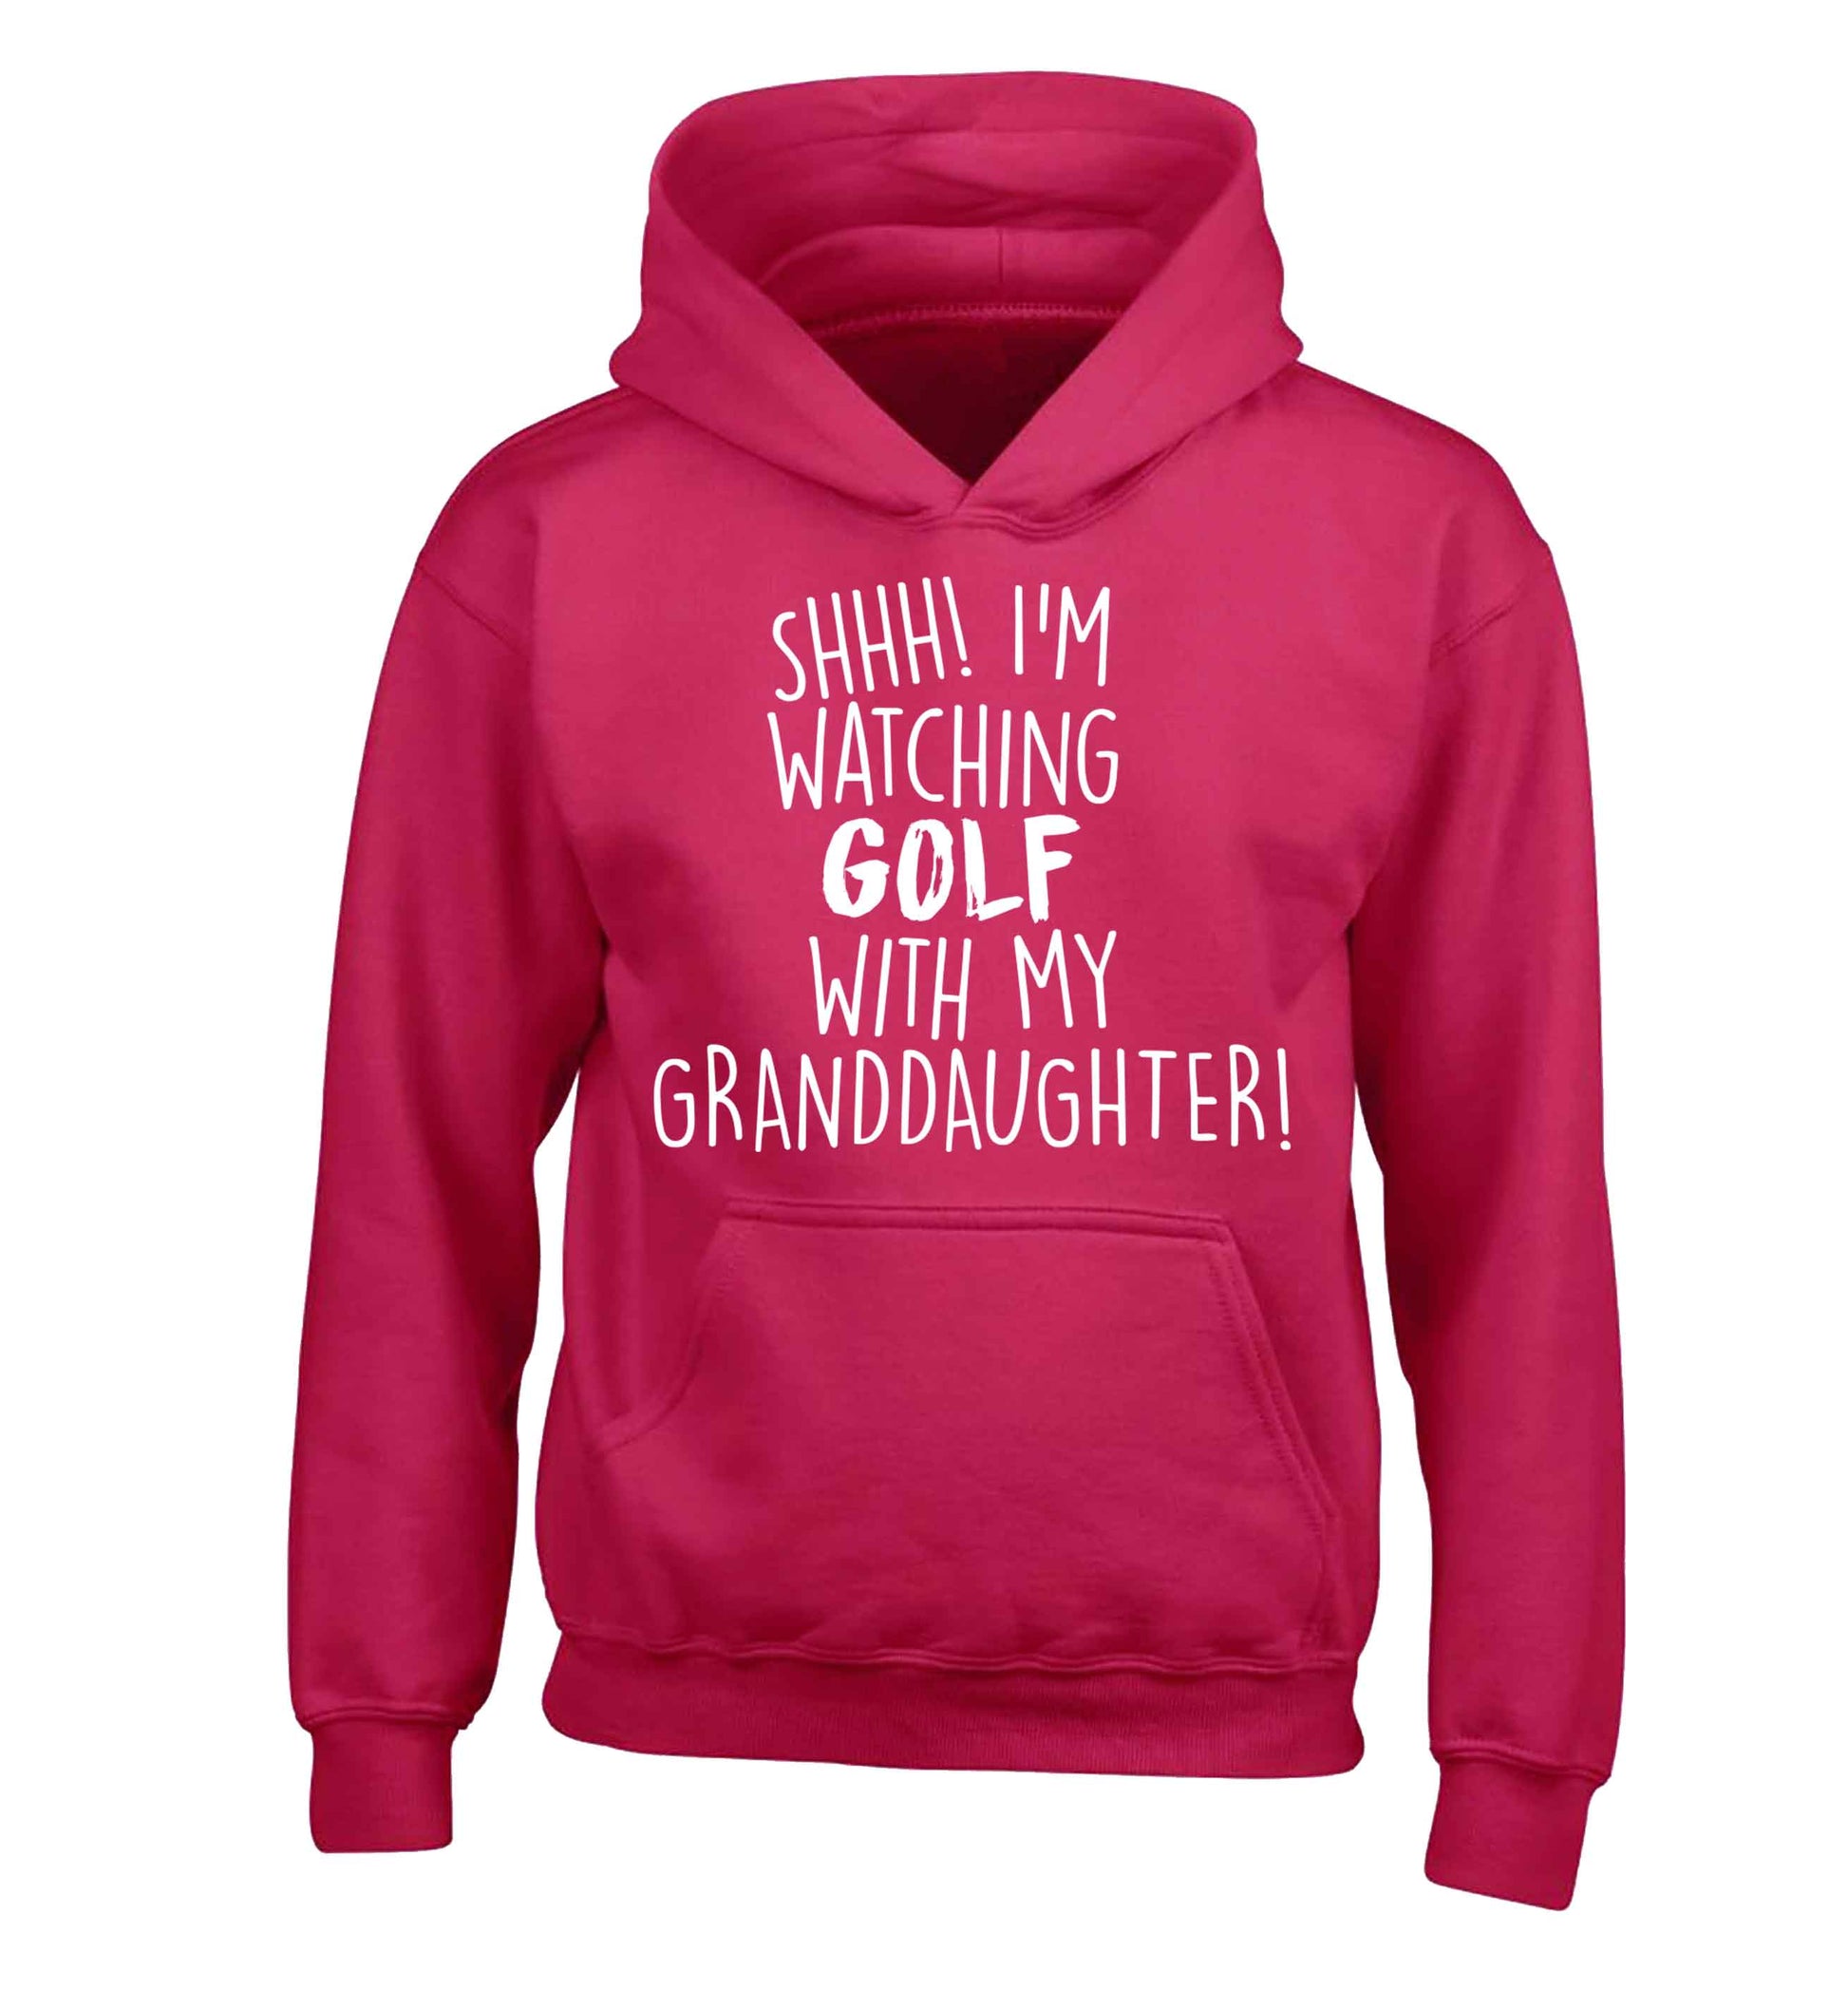 Shh I'm watching golf with my granddaughter children's pink hoodie 12-13 Years